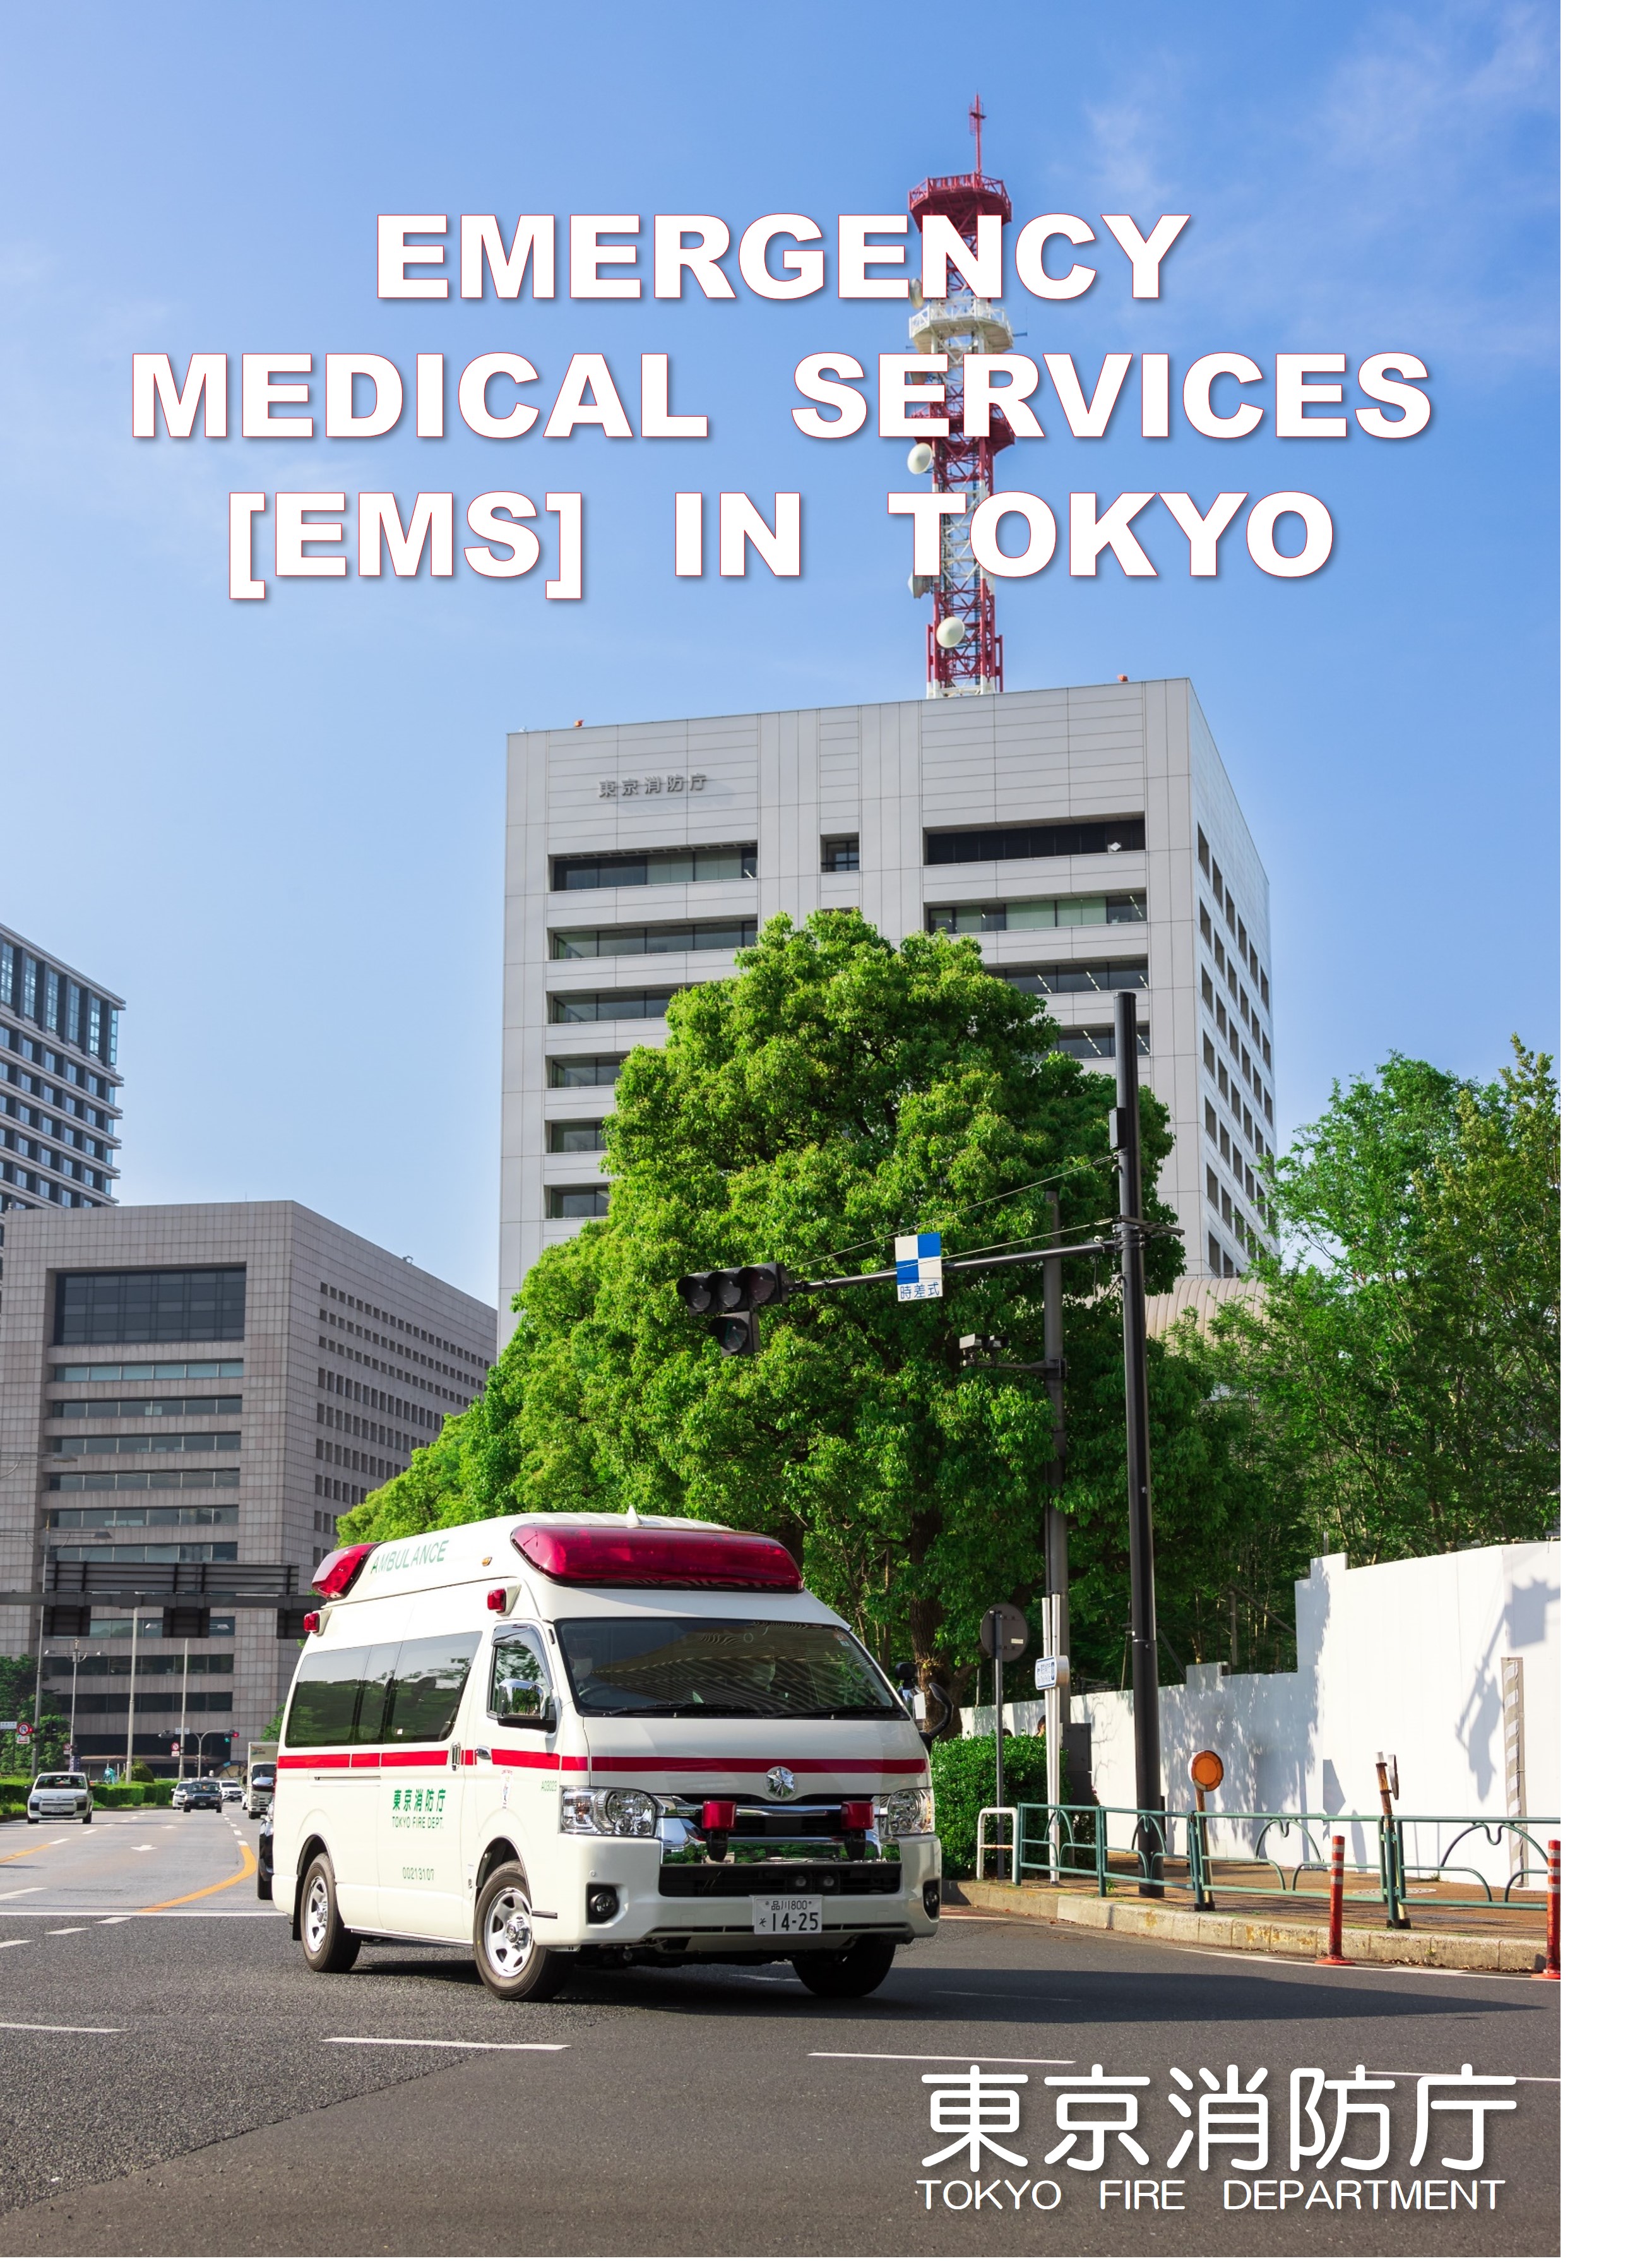 EMERGENCY MEDICAL SERVICES [EMS] IN TOKYO